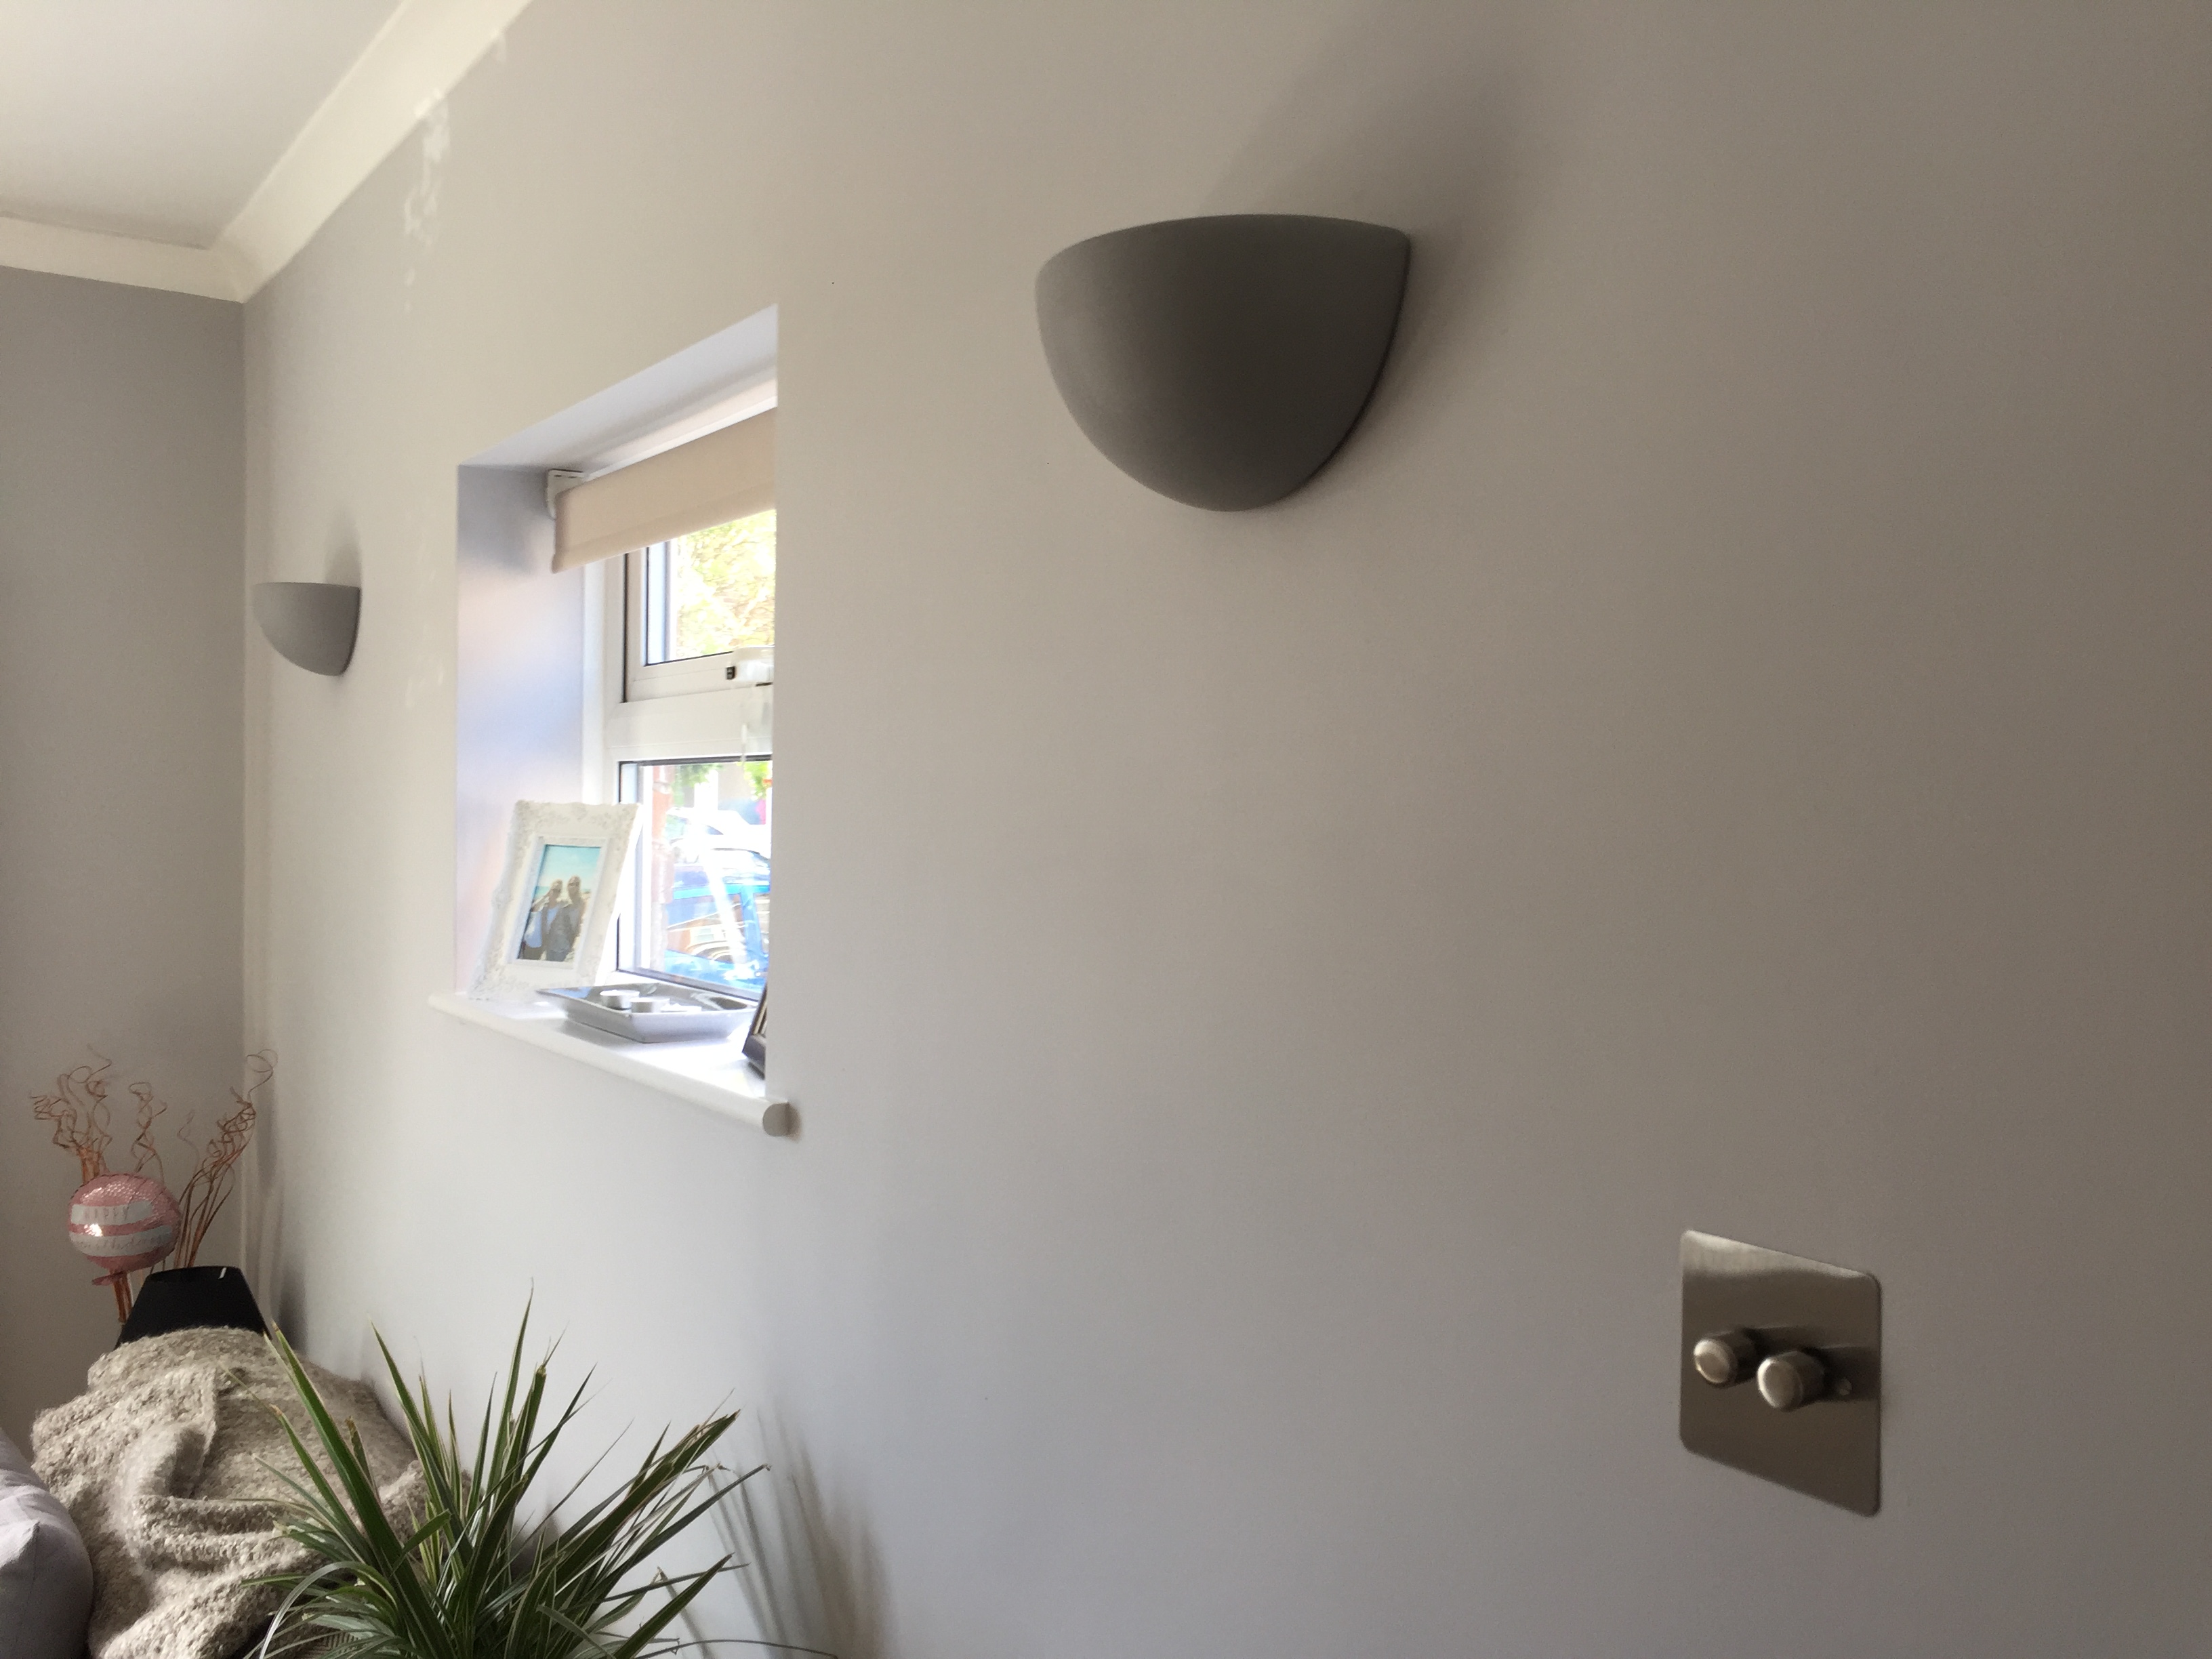 Newly installed wall uplighters with LED lamps and compatible 2 gang dimmer switch